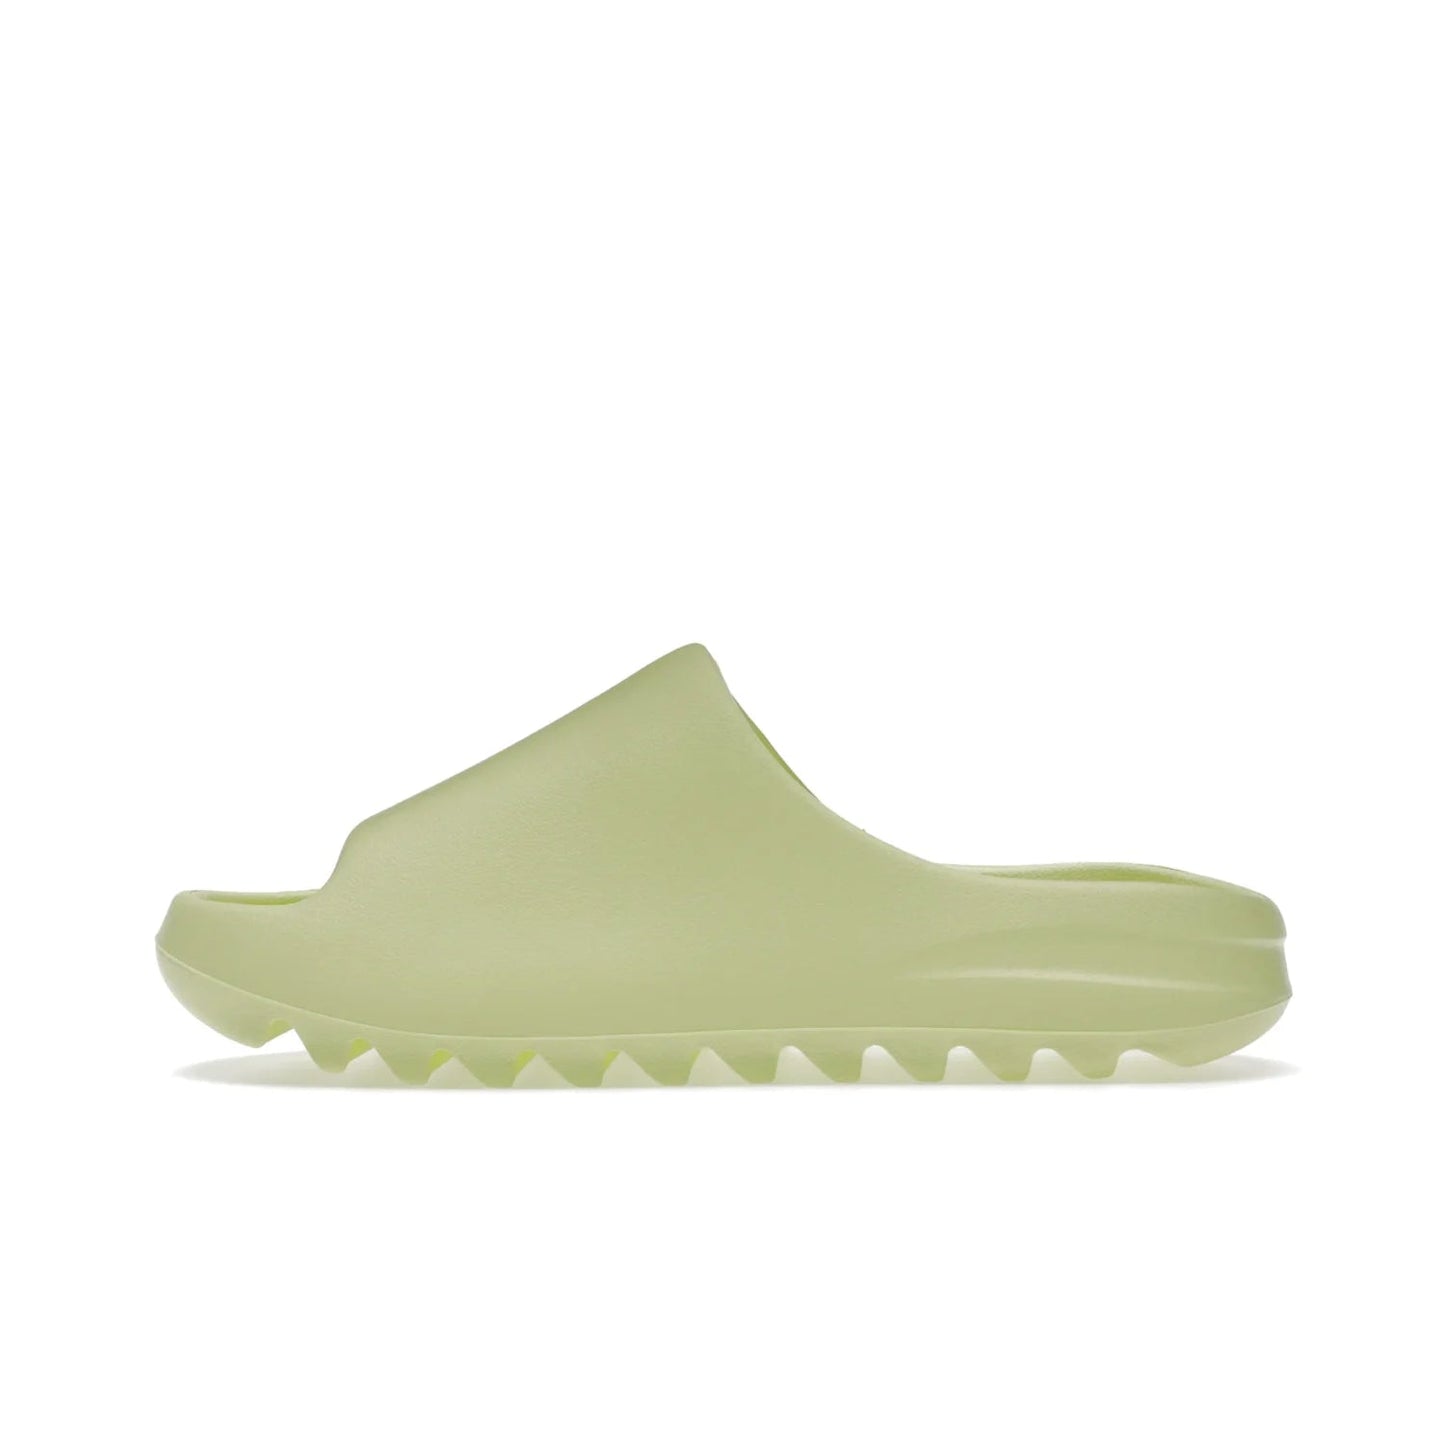 adidas Yeezy Slide Glow Green (2022) (Restock) - Image 19 - Only at www.BallersClubKickz.com - #
Introducing the Adidas Yeezy Slide Glow Green (2022) Restock. Offering ultimate comfort & responsive style with its grooved outsole. Grab your pair on May 2022 for an unforgettable addition to your sneaker collection. US and UK sizes the same.